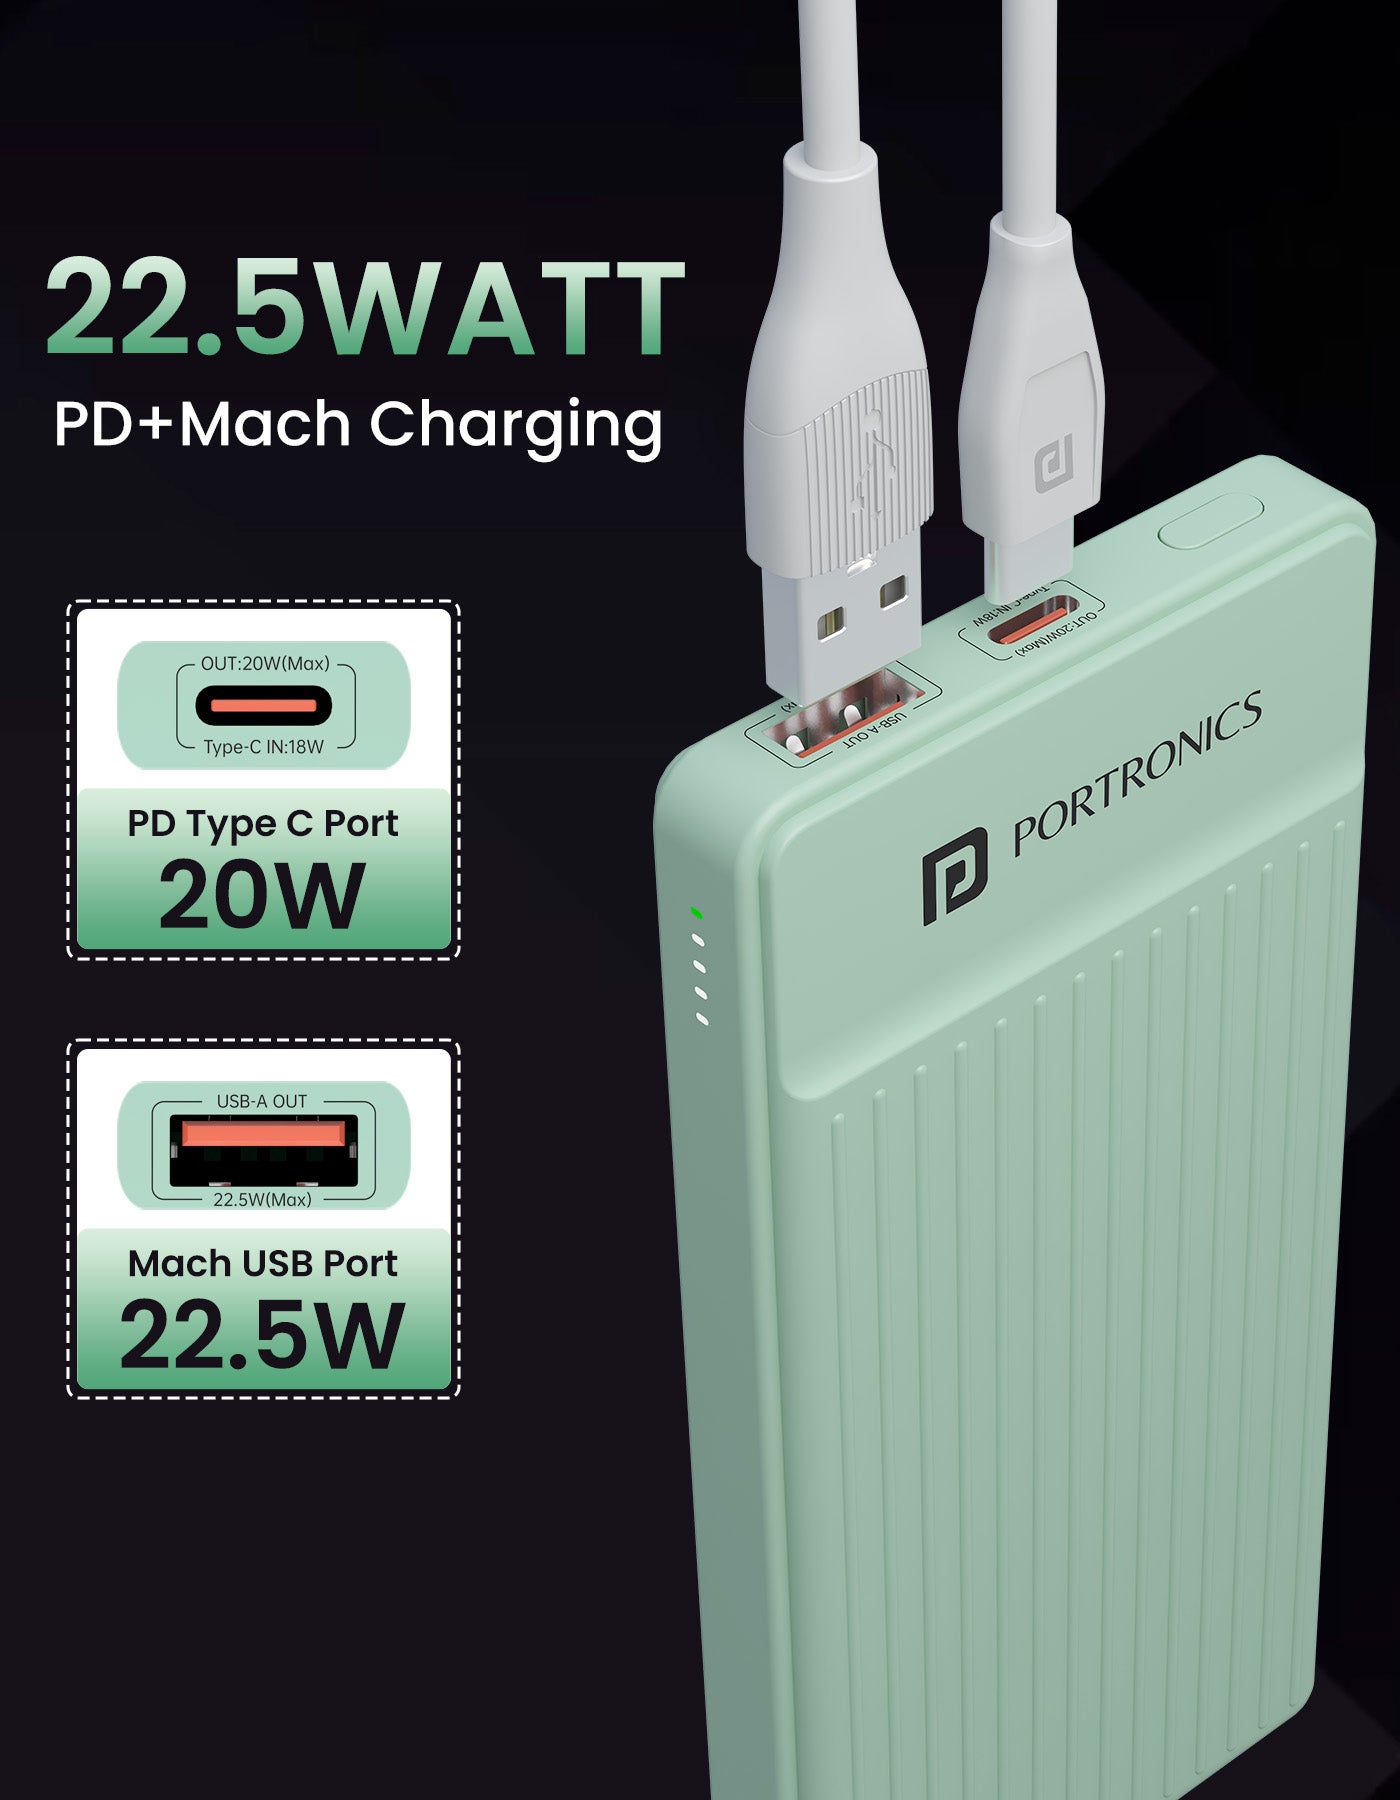 Portronics Luxcell B 10000mah Power bank with transparent display